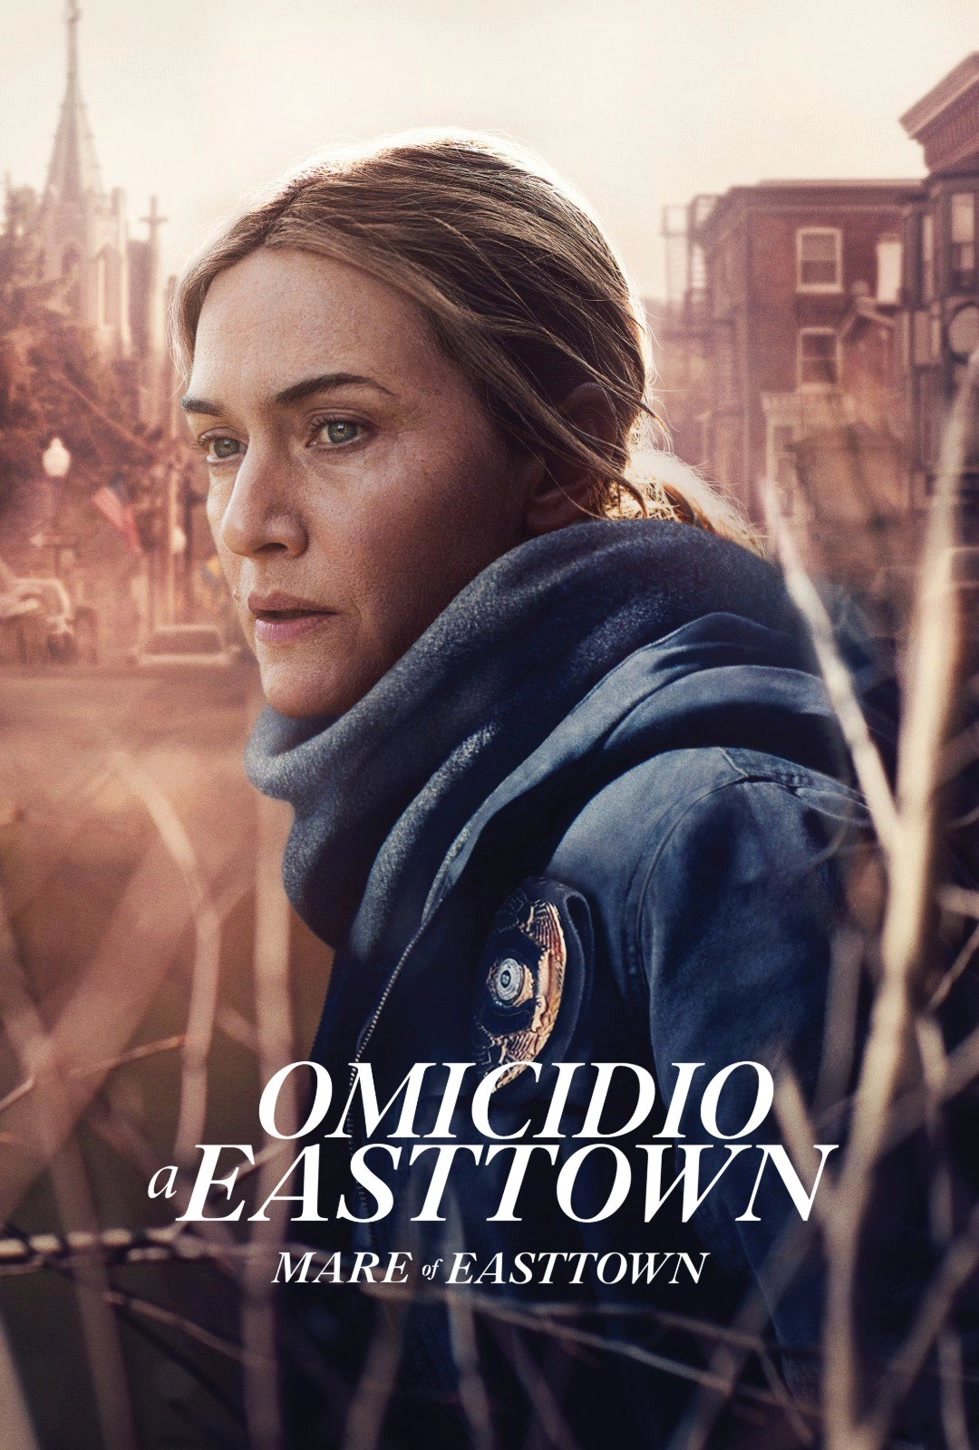 Omicidio a Easttown: Mare of Easttown